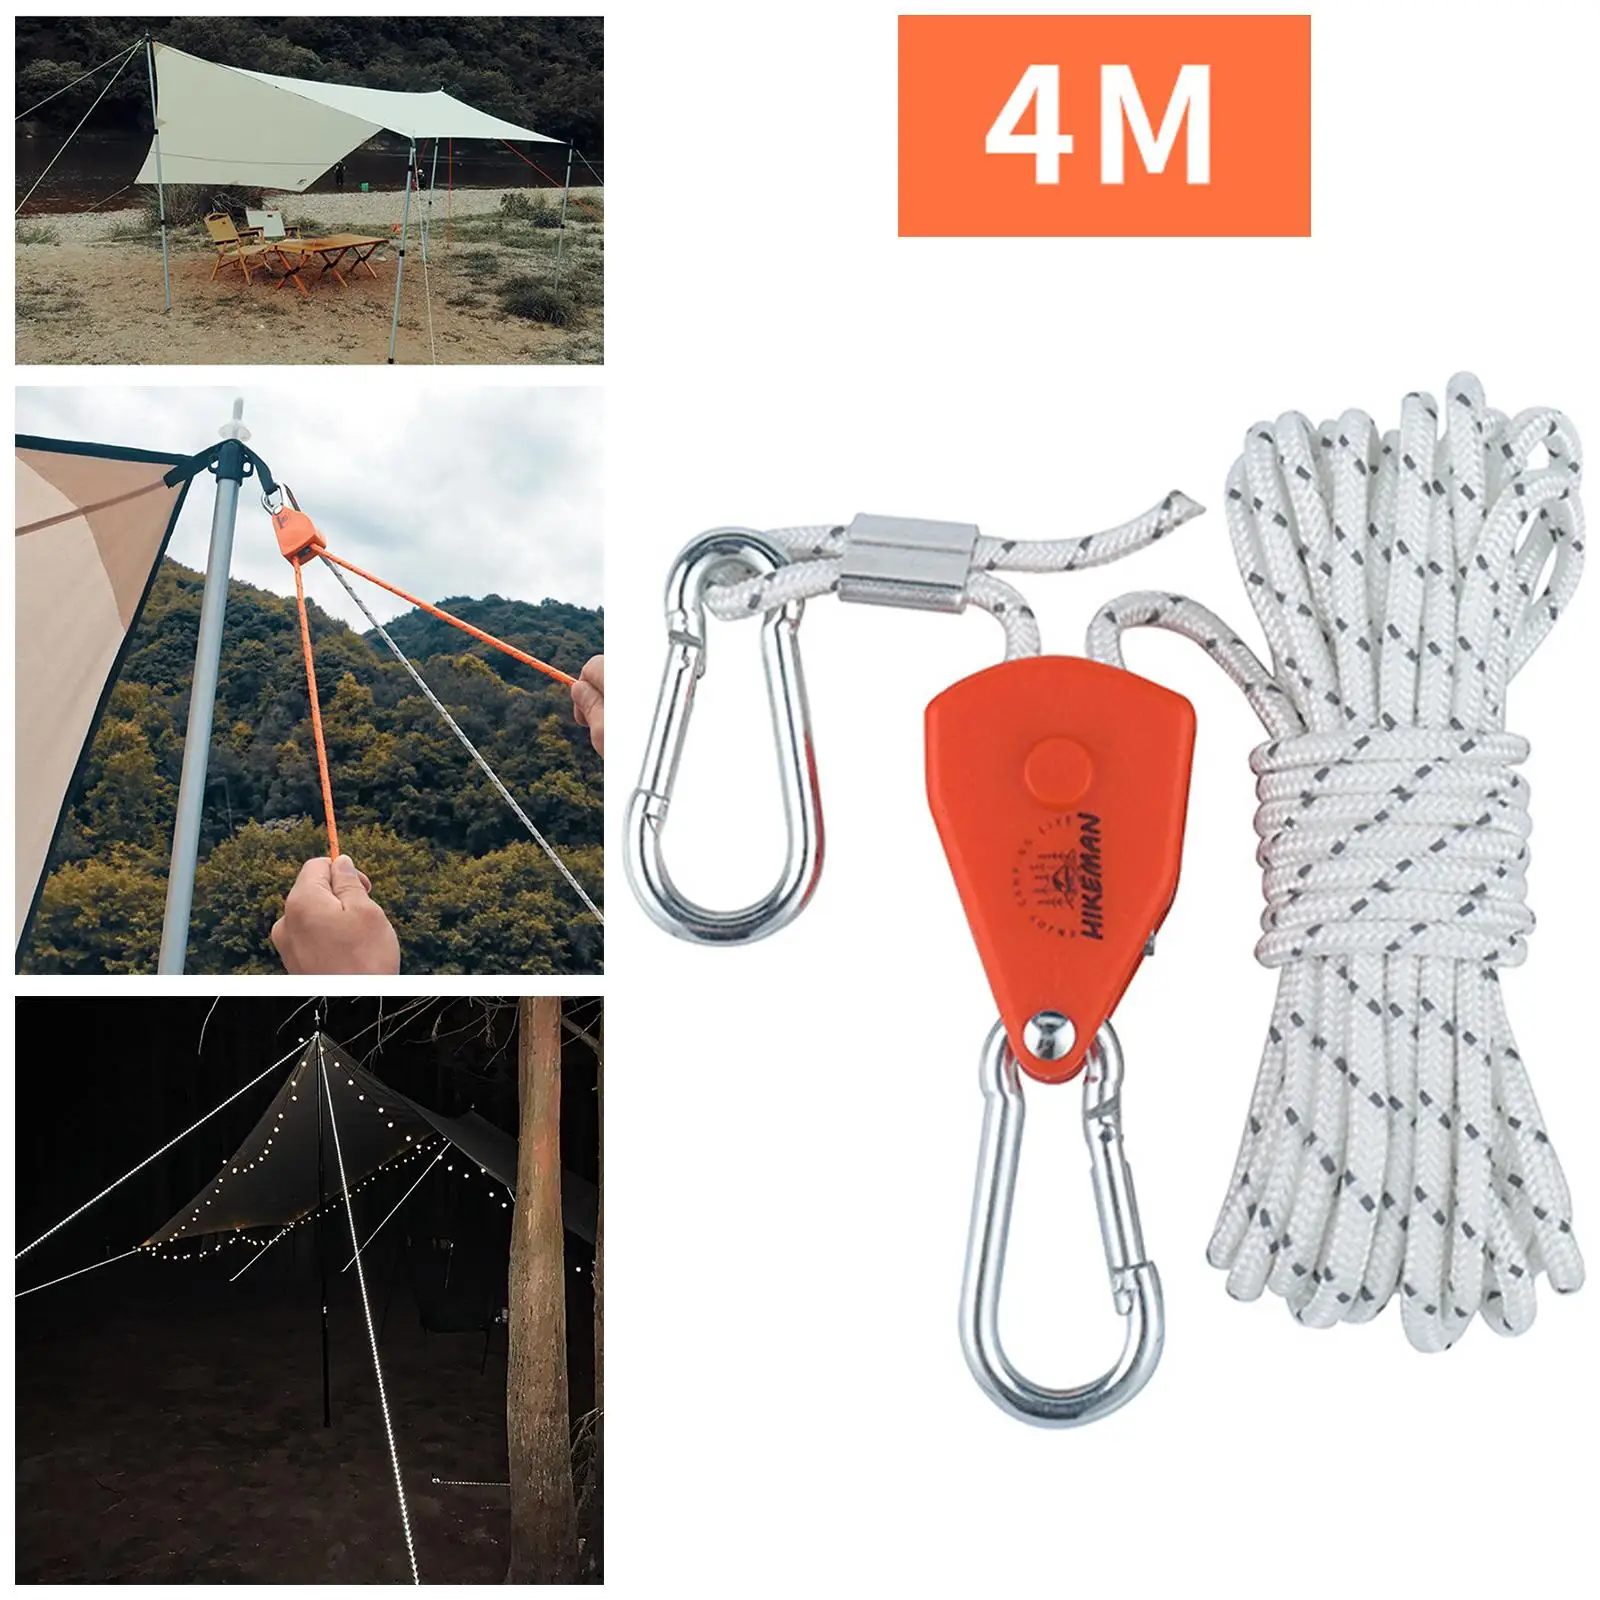 Pulley Ratchet Rope Hanger Grow Light for Camping Hiking Outdoor Backpacks